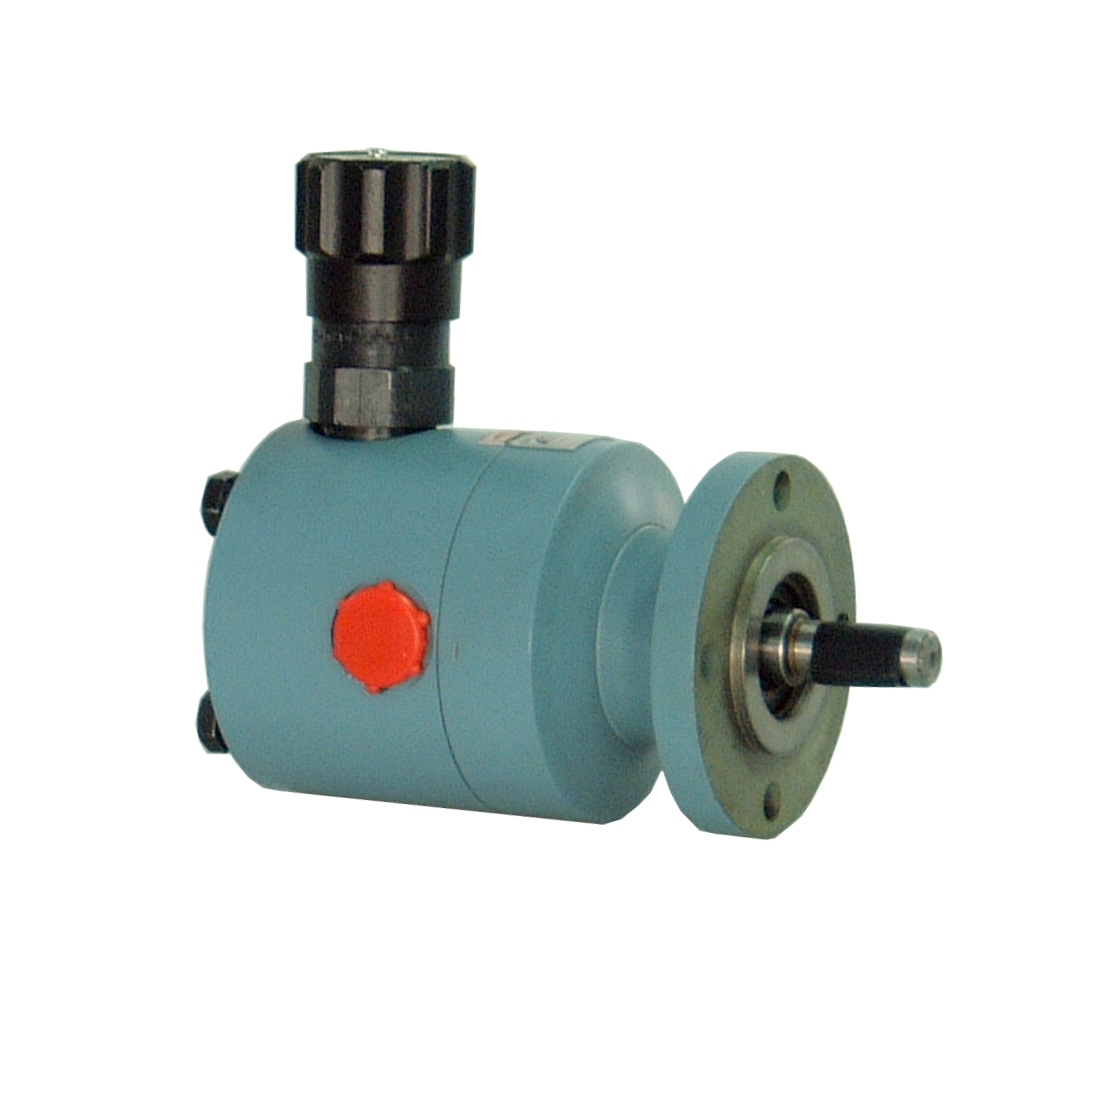 pump with inbuilt relief valve and flange mounted